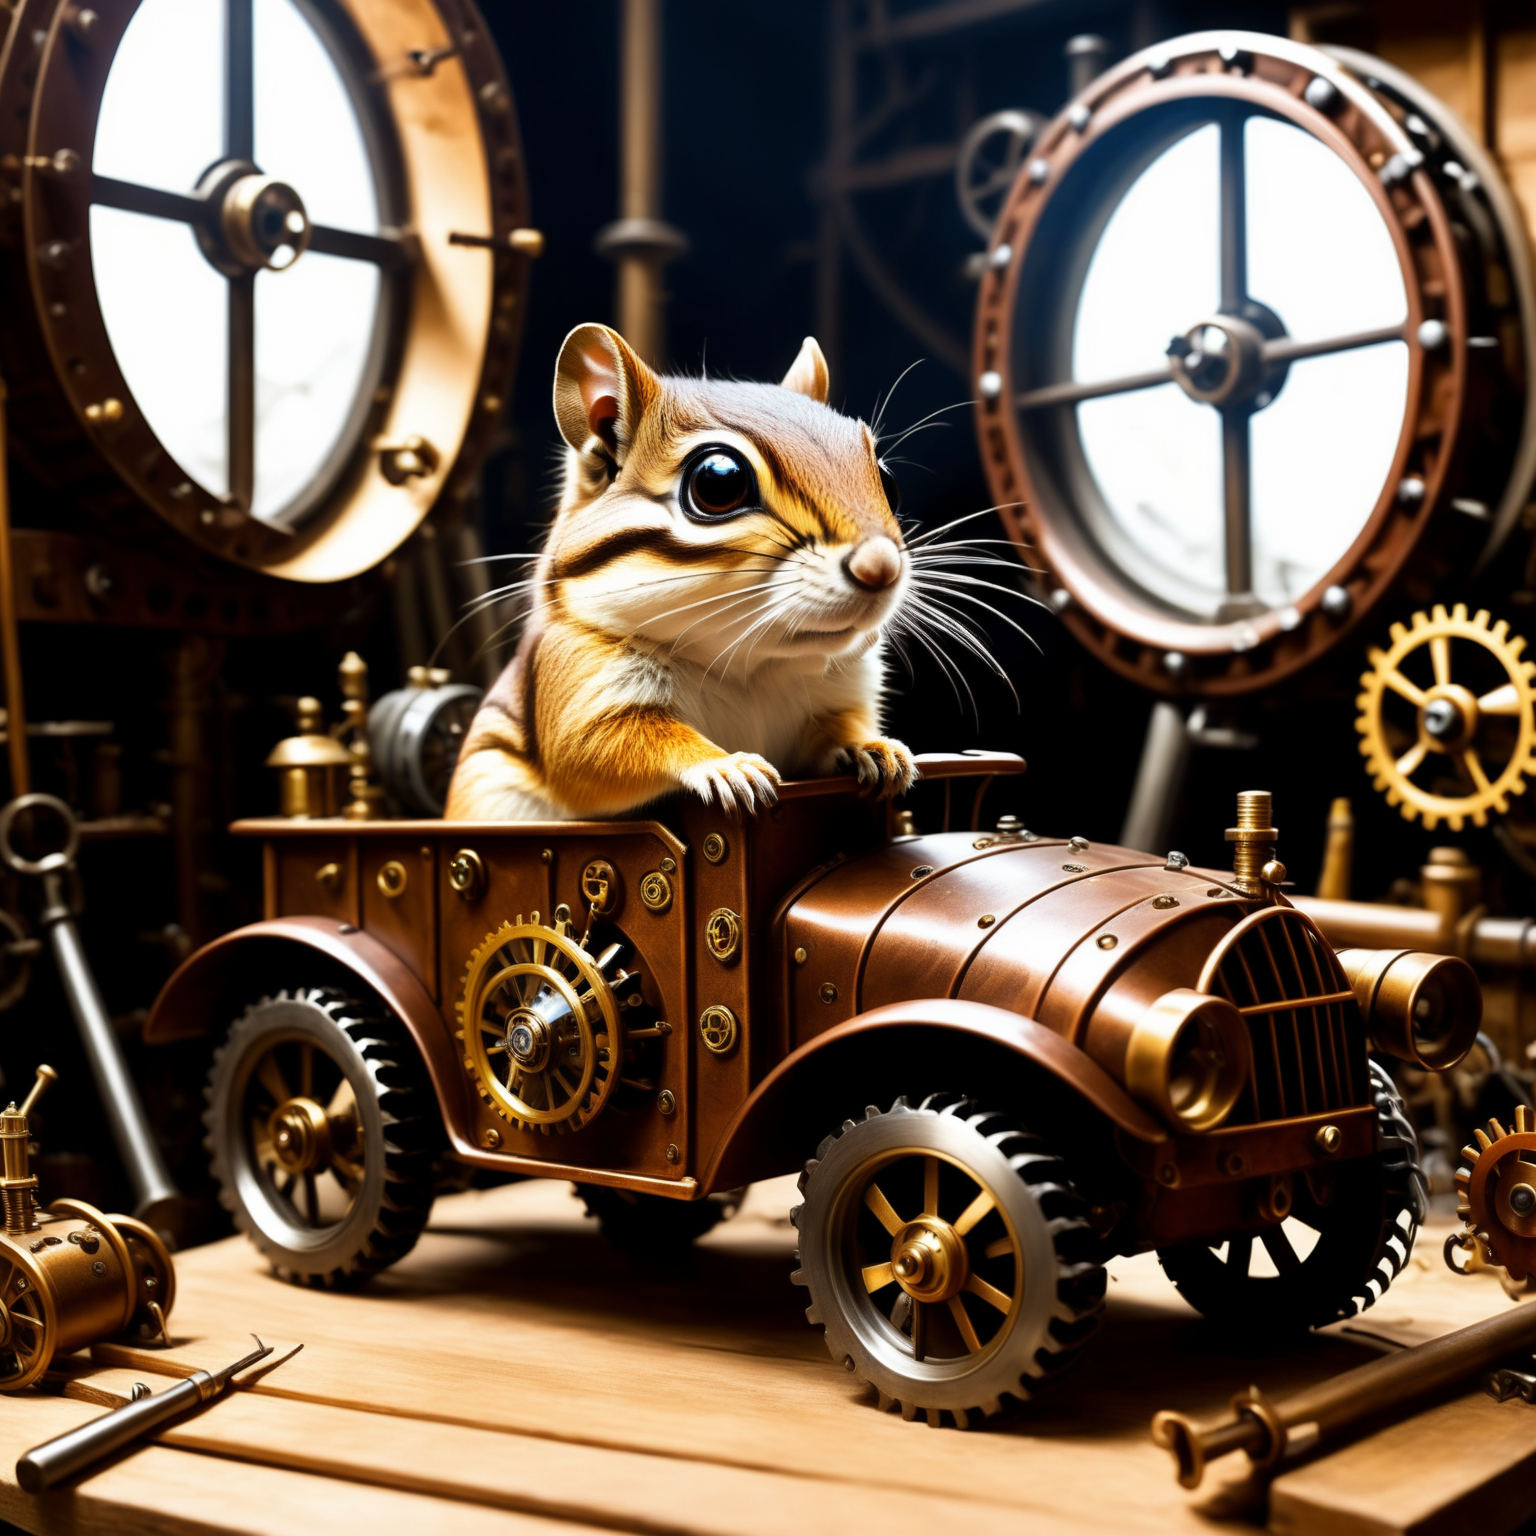 45. A curious chipmunk inventor tinkering on a massive steampunk vehicle in her backyard workshop, tools scattered around ...